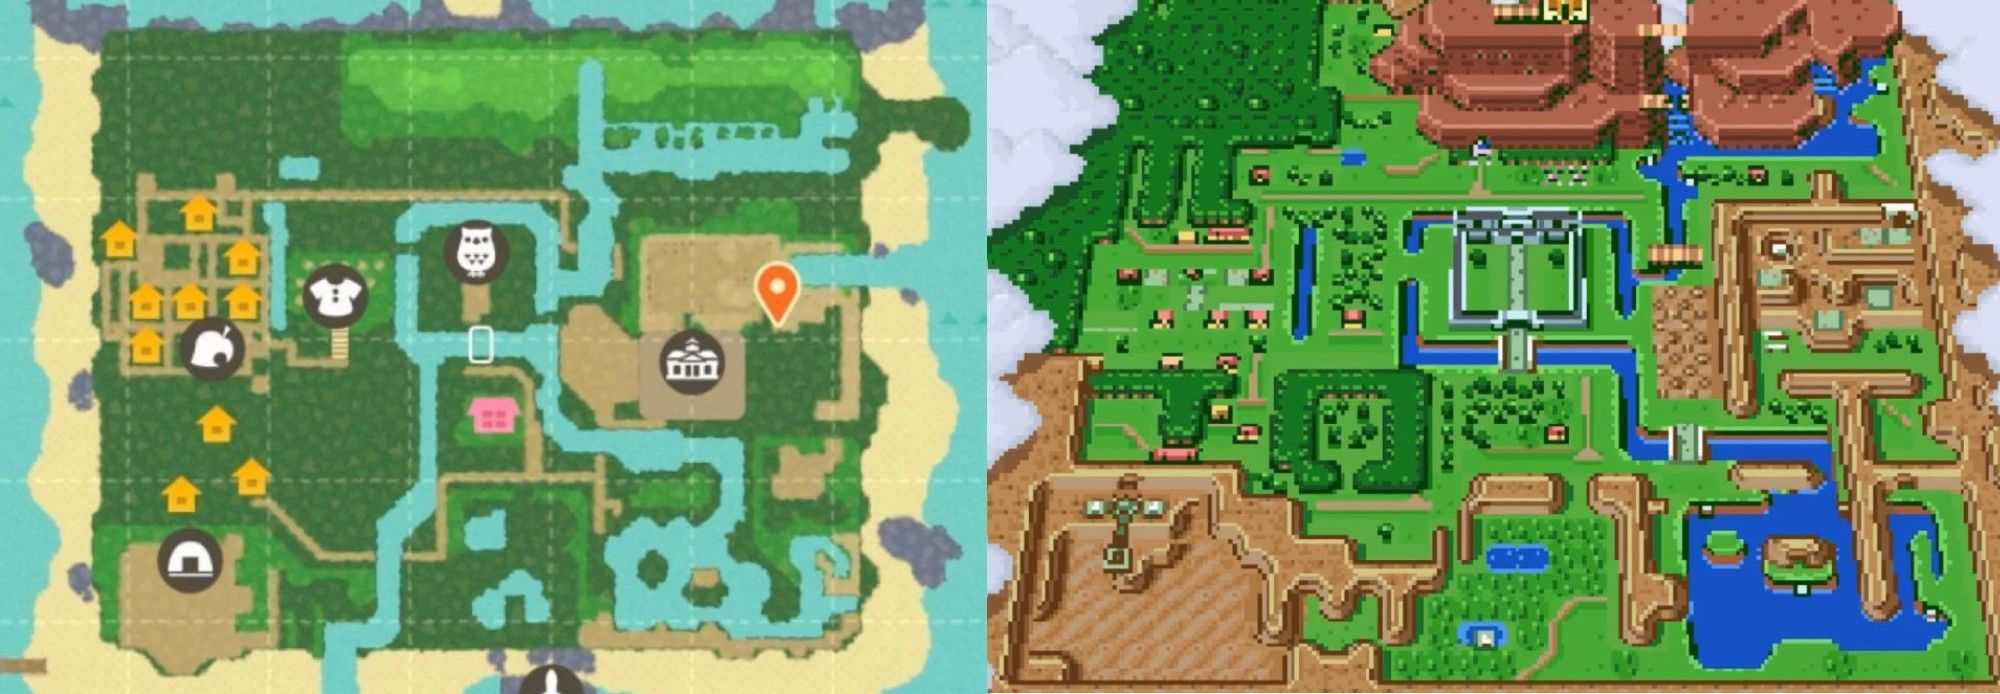 A player recreated the map from The Legend of Zelda in Animal Crossing: New Horizons